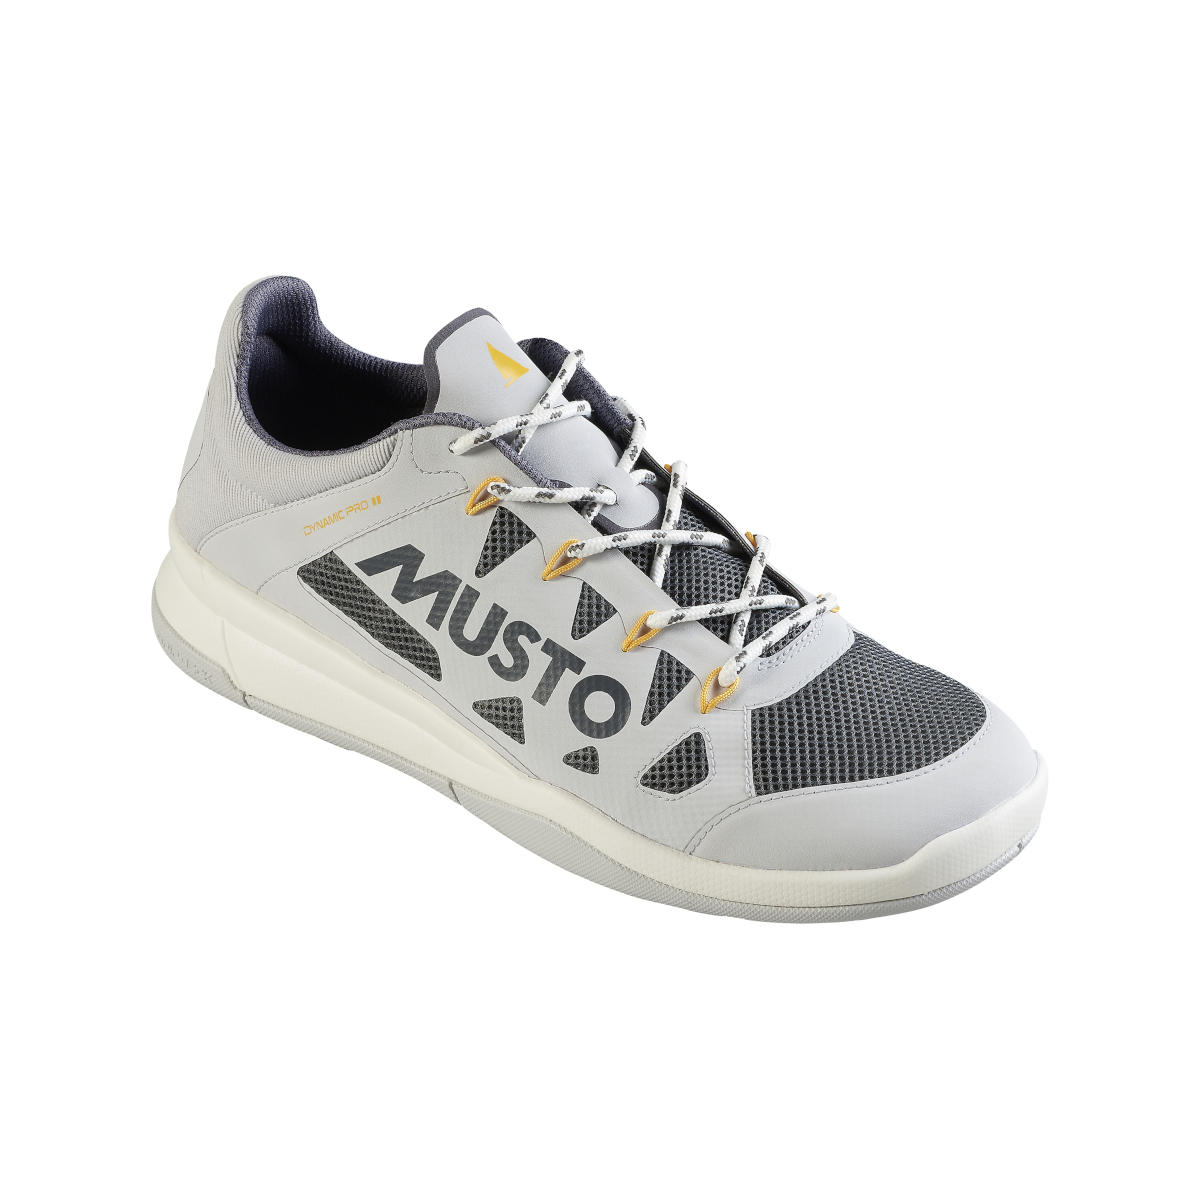 Musto Dynamic Pro II Adapt chaussures bateau homme gris clair / jaune, taille 42,5